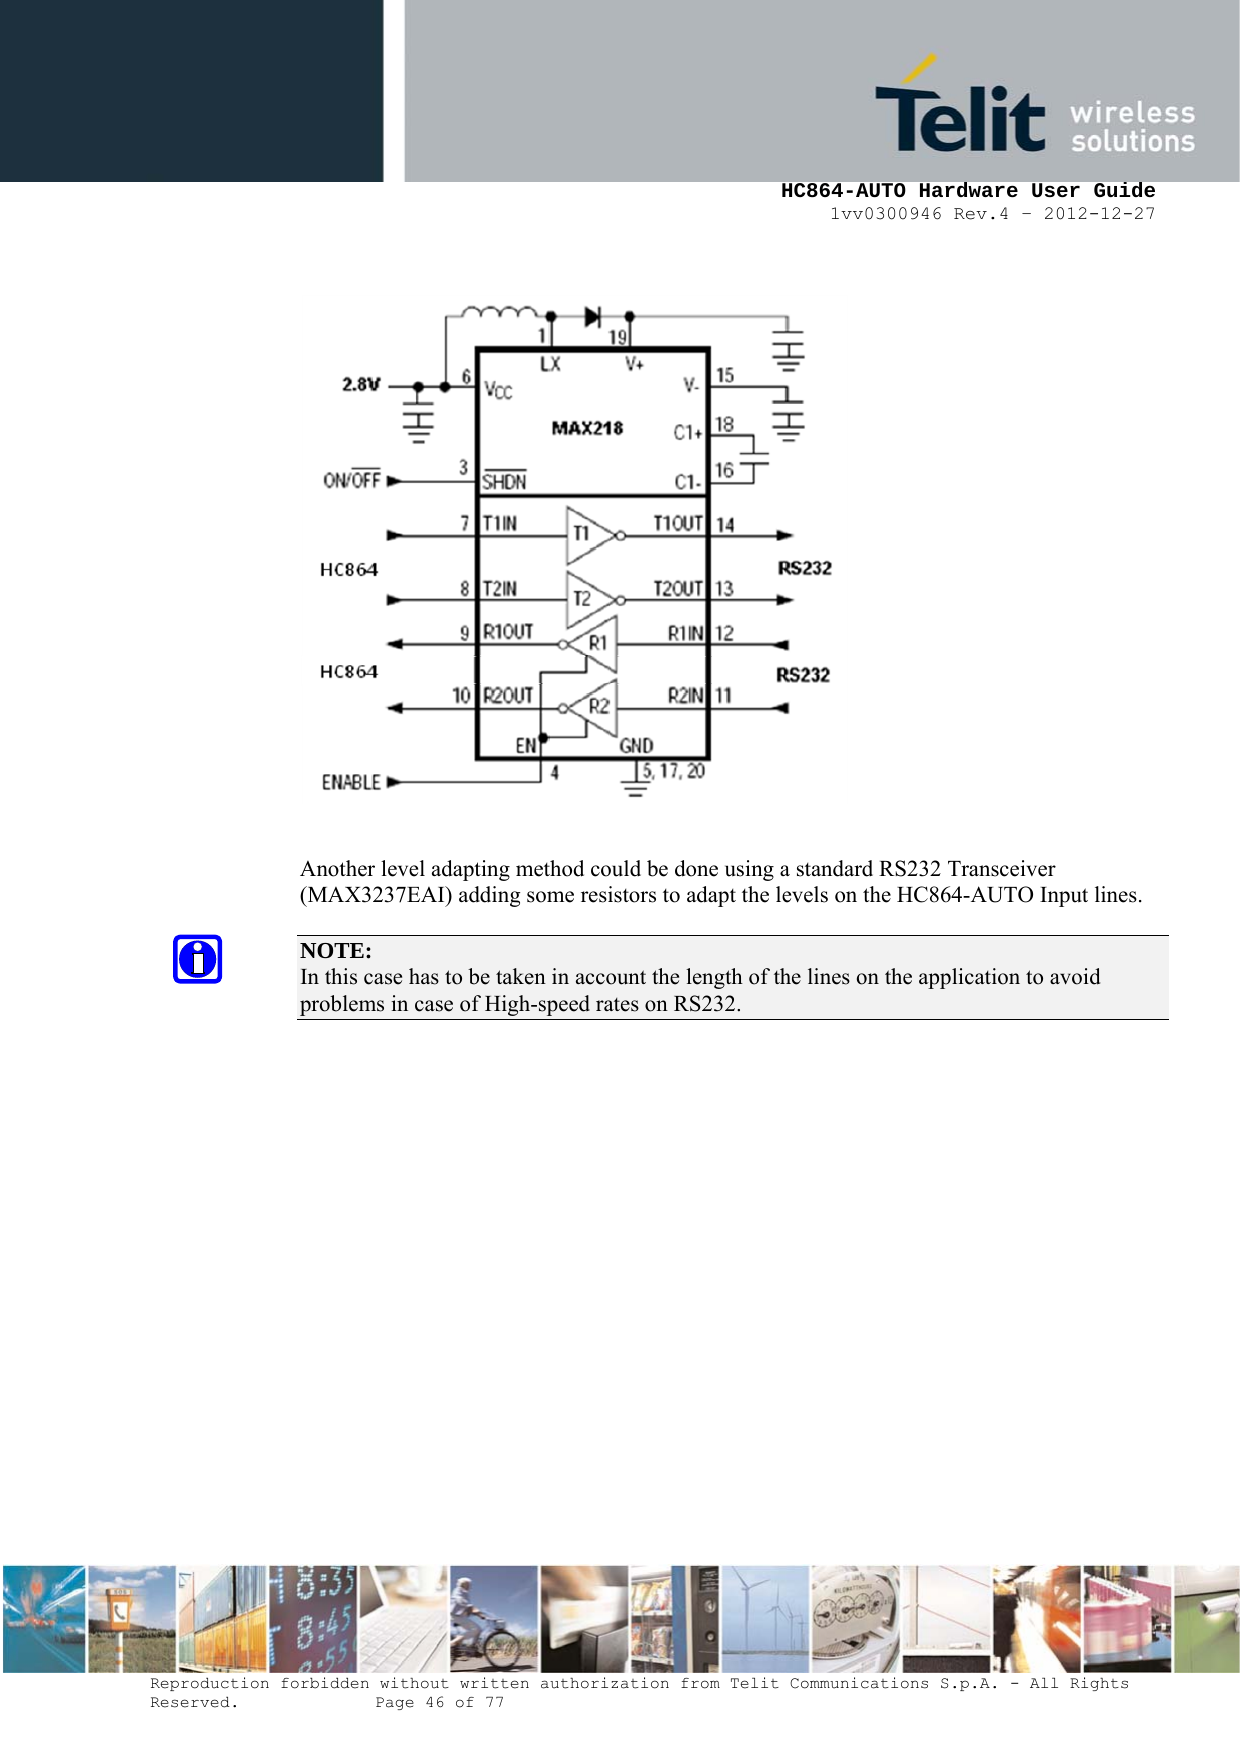     HC864-AUTO Hardware User Guide 1vv0300946 Rev.4 – 2012-12-27 Reproduction forbidden without written authorization from Telit Communications S.p.A. - All Rights Reserved.    Page 46 of 77     Another level adapting method could be done using a standard RS232 Transceiver (MAX3237EAI) adding some resistors to adapt the levels on the HC864-AUTO Input lines.  NOTE:  In this case has to be taken in account the length of the lines on the application to avoid problems in case of High-speed rates on RS232. 